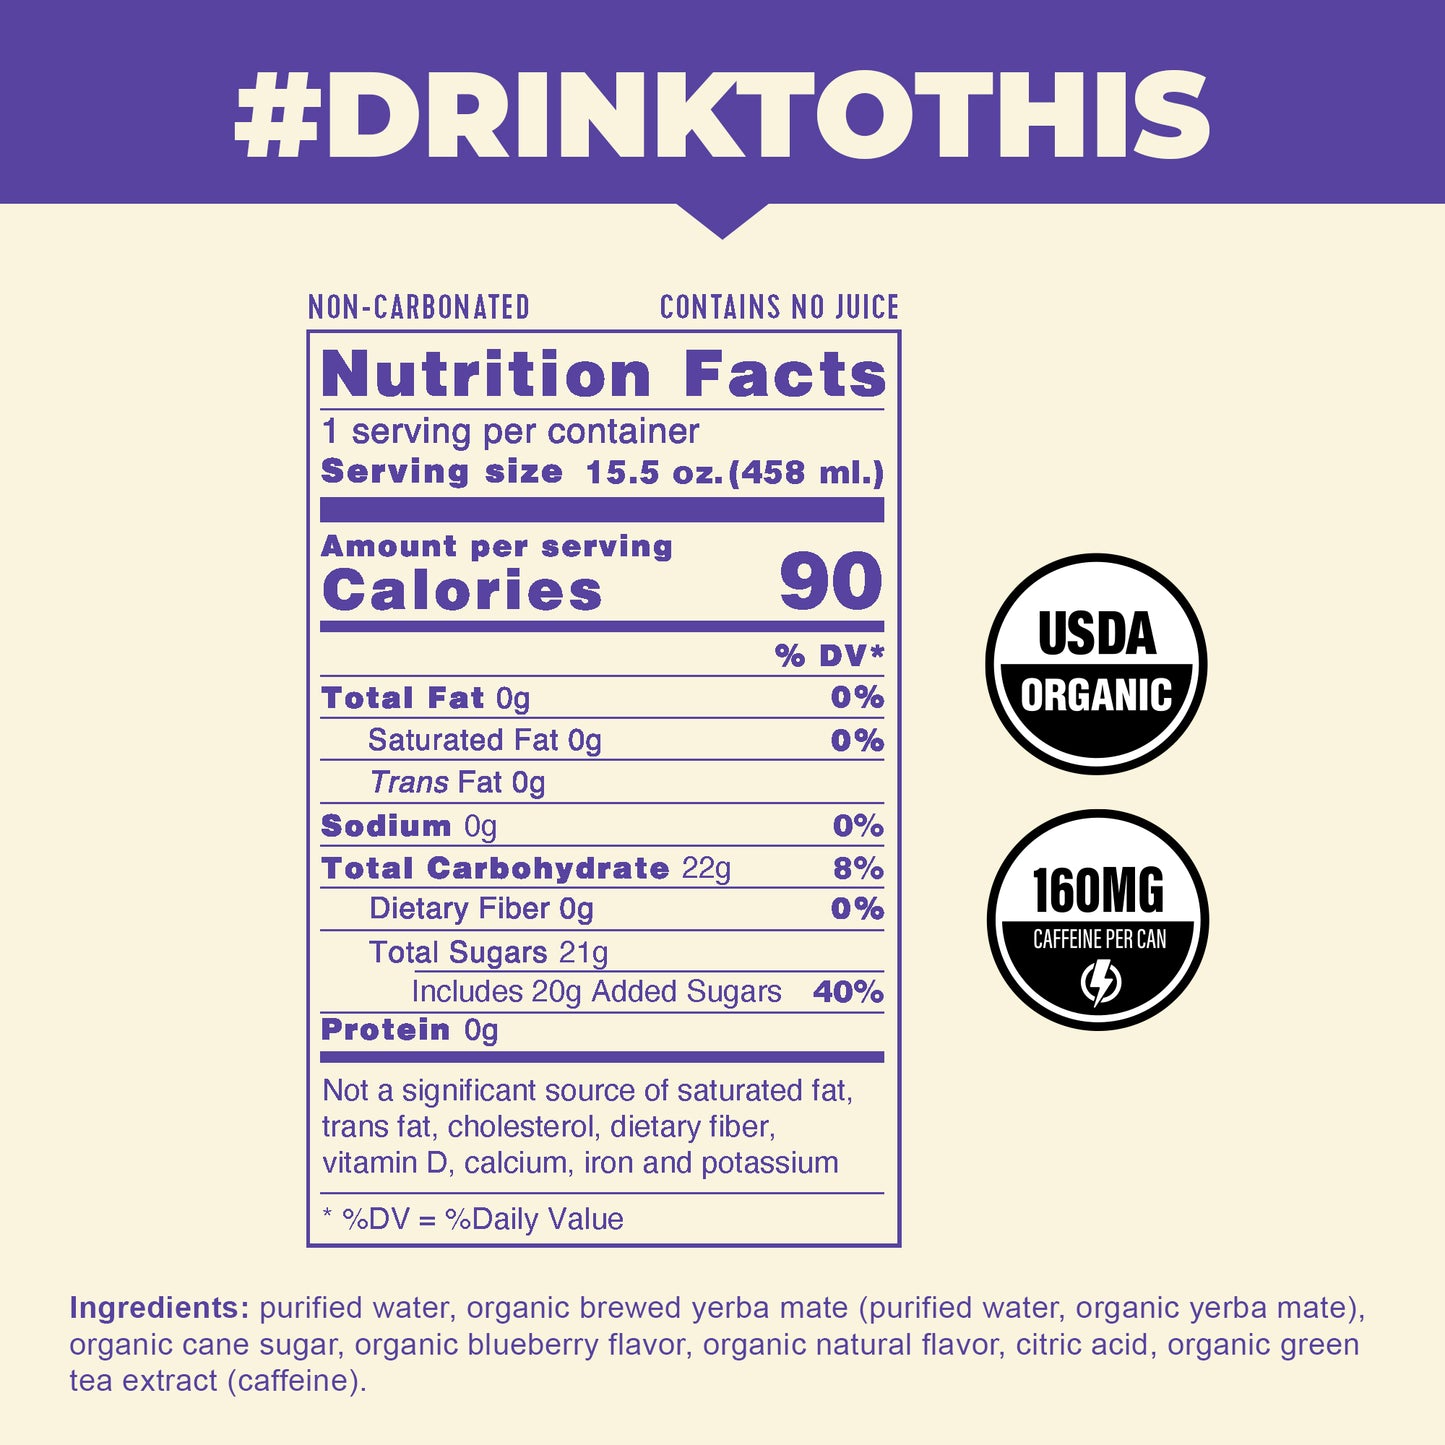 The nutrition label for a can of CLEAN Cause Non-Carbonated Blueberry